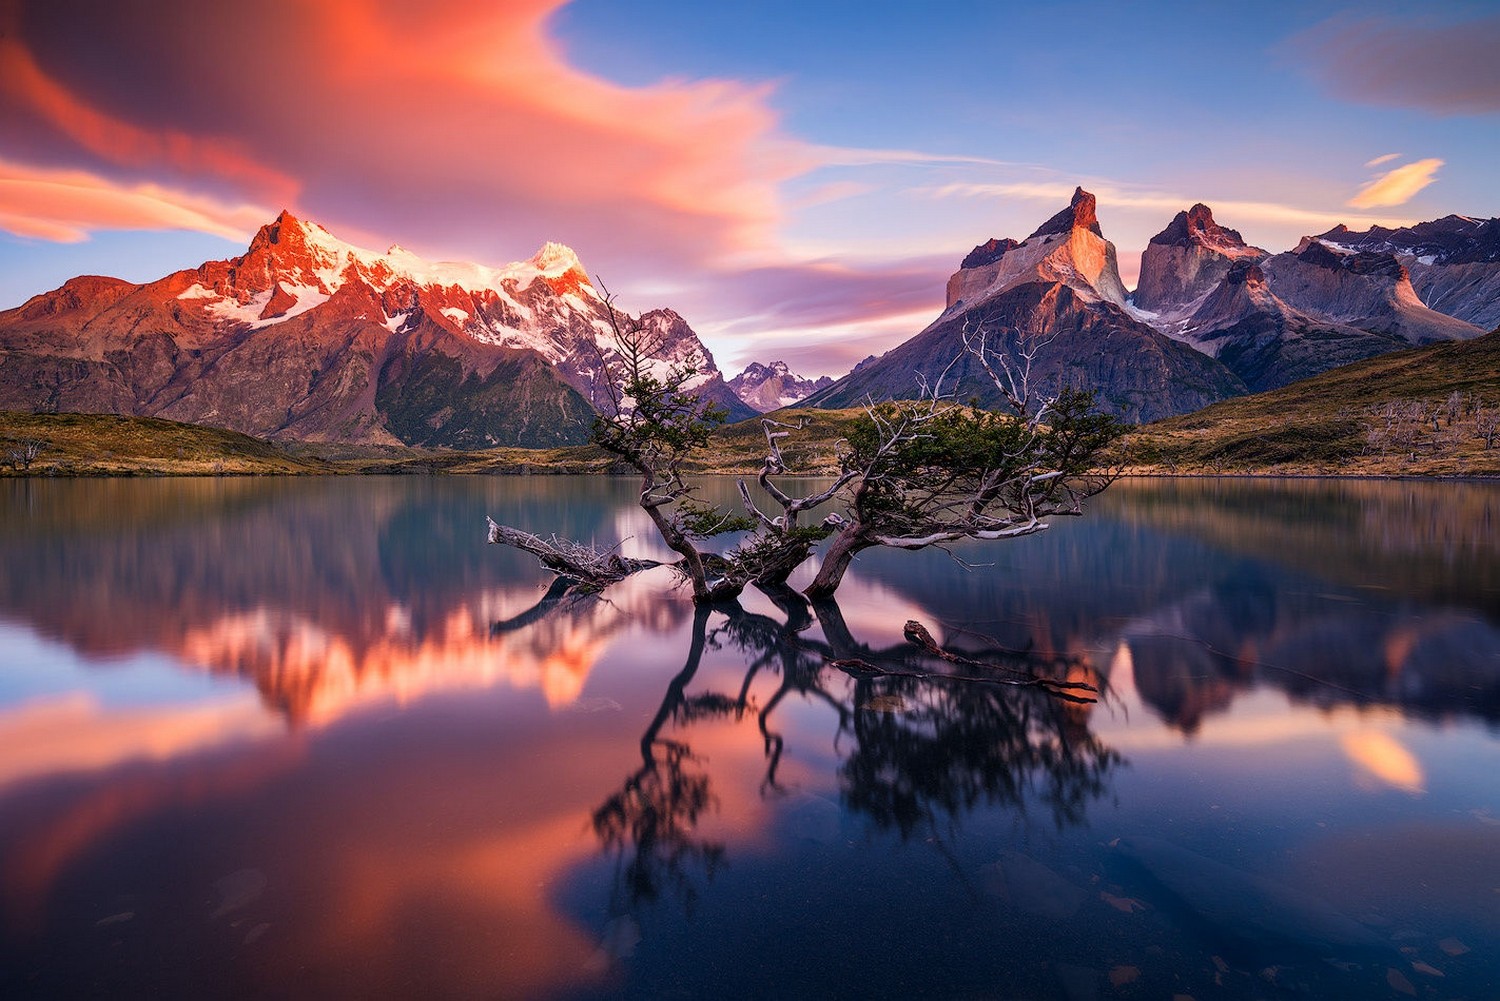 General 1500x1001 photography nature landscape morning sunlight calm mountains snowy peak lake reflection trees Torres del Paine Chile South America Patagonia